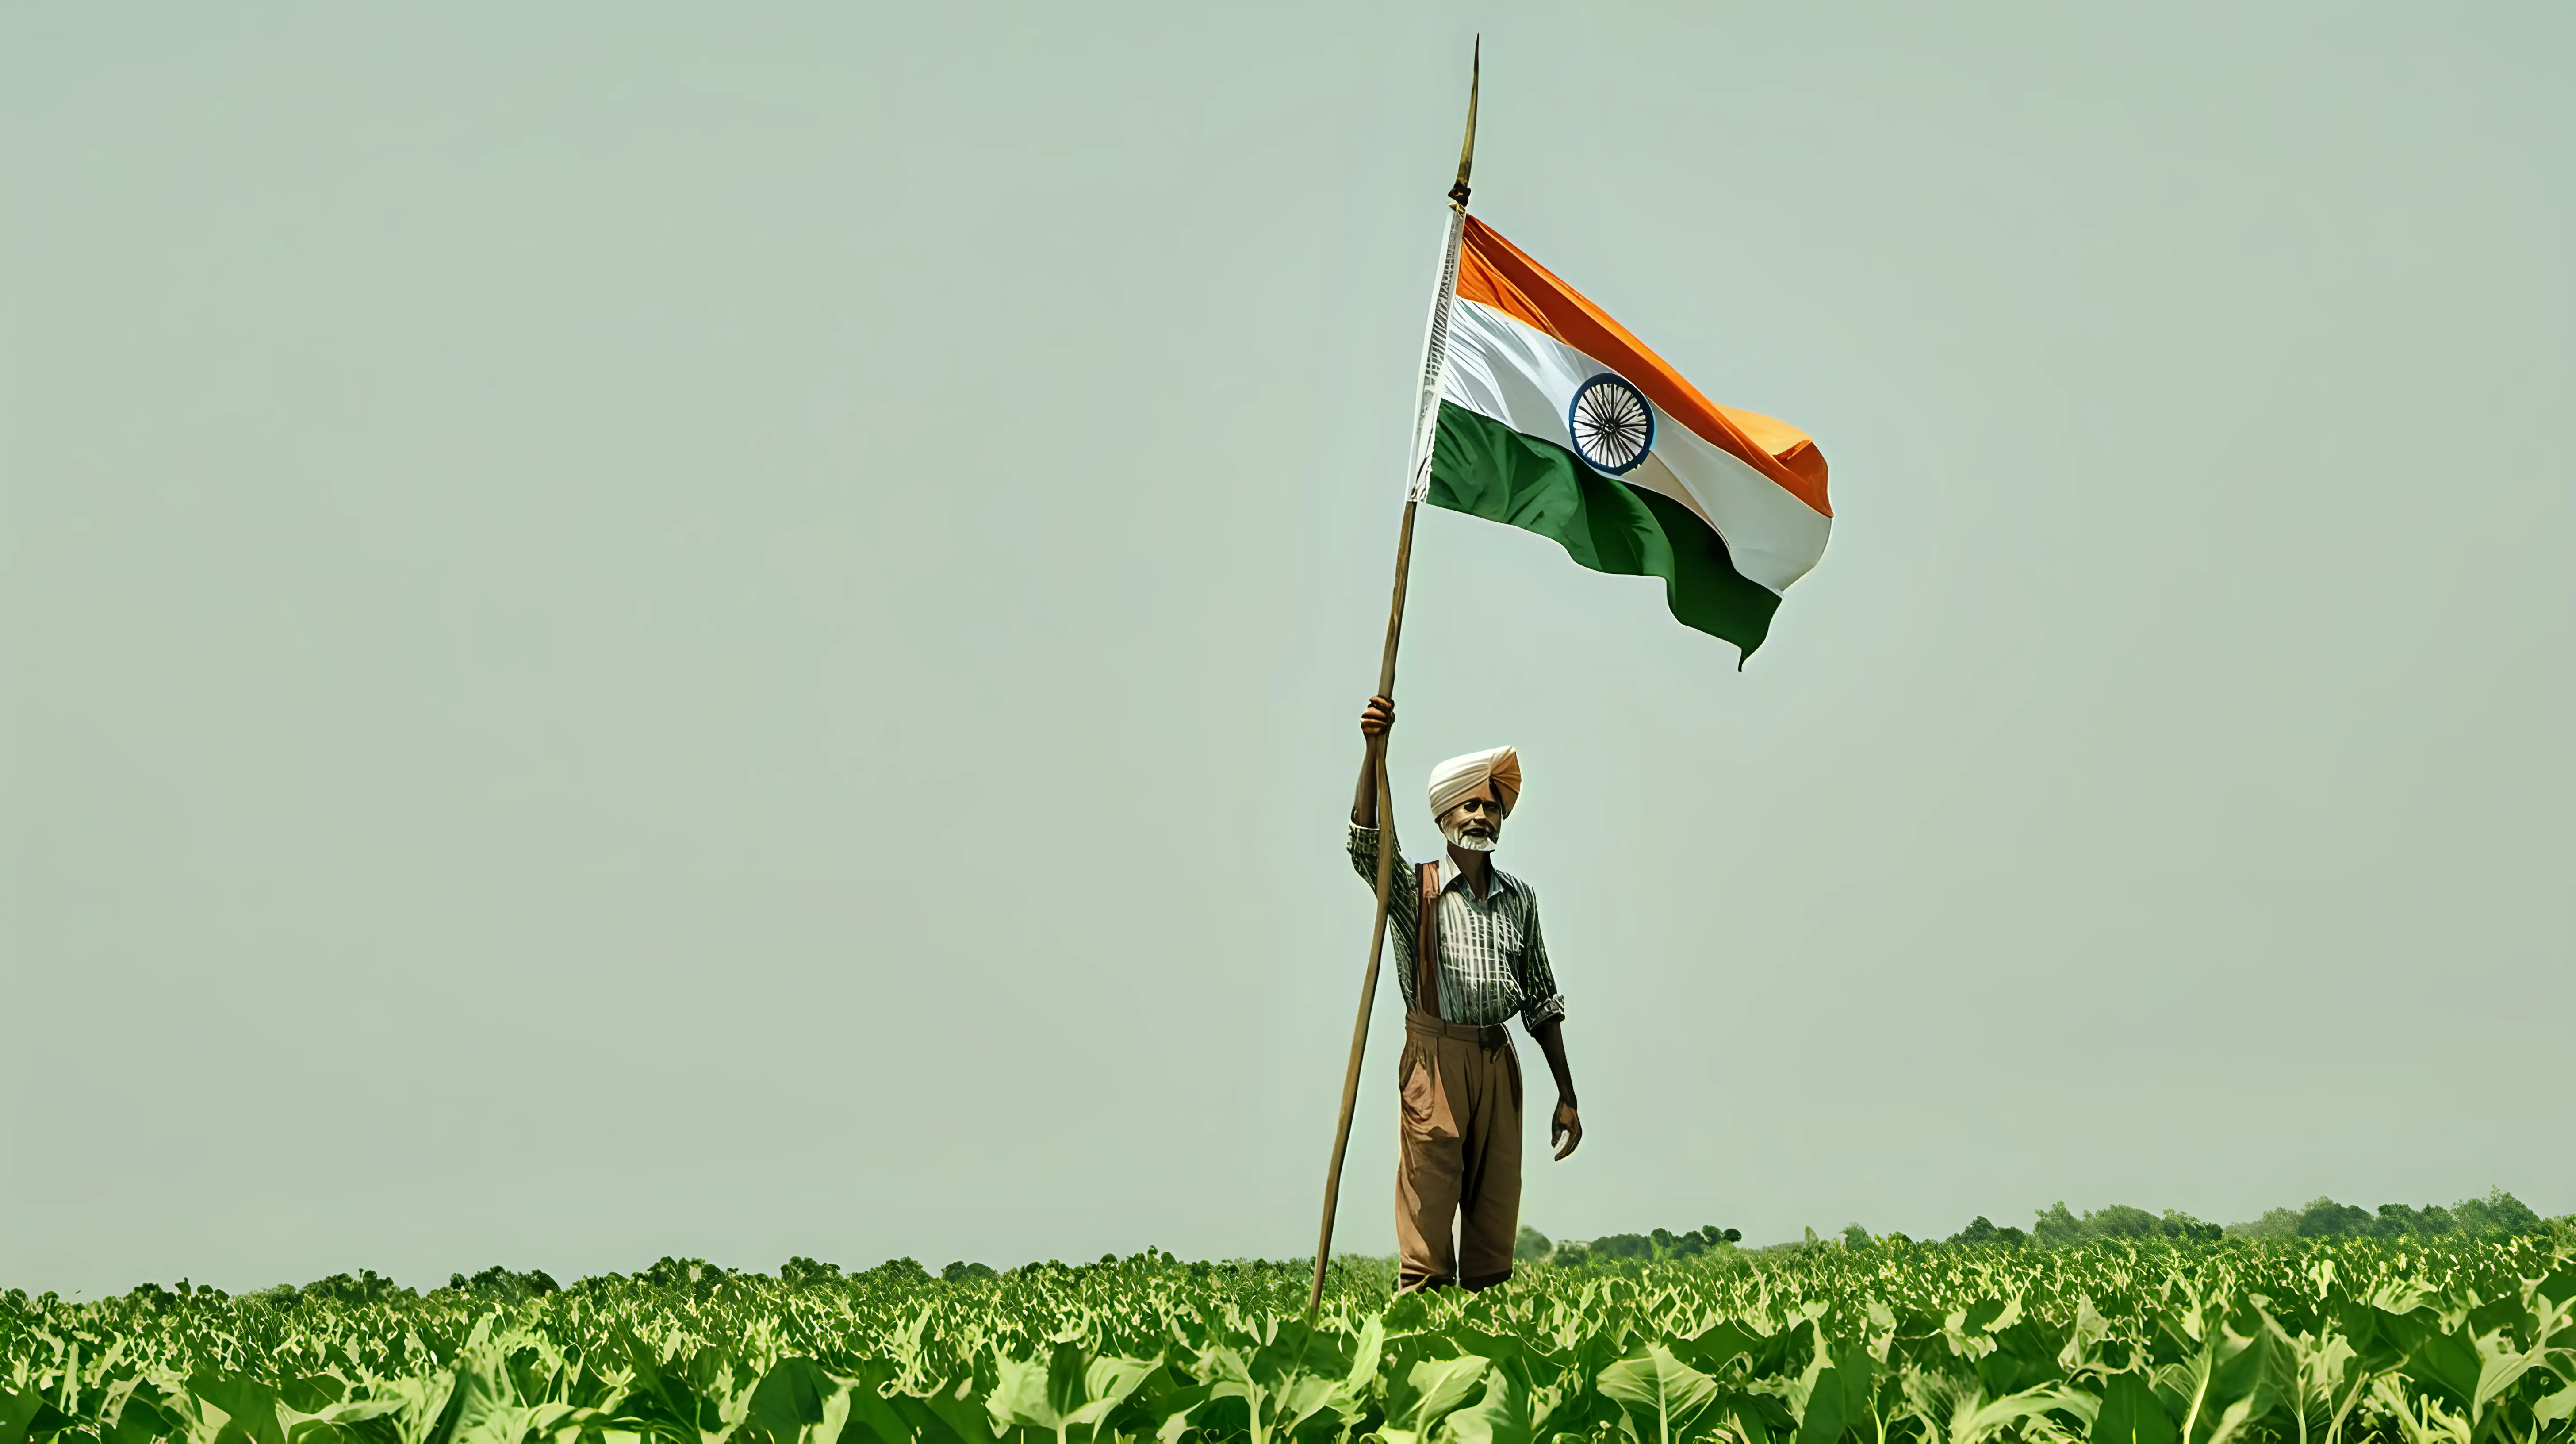 A farmer raising the Indian flag high above their fields, symbolizing their contribution to the country's agricultural prosperity and food security.